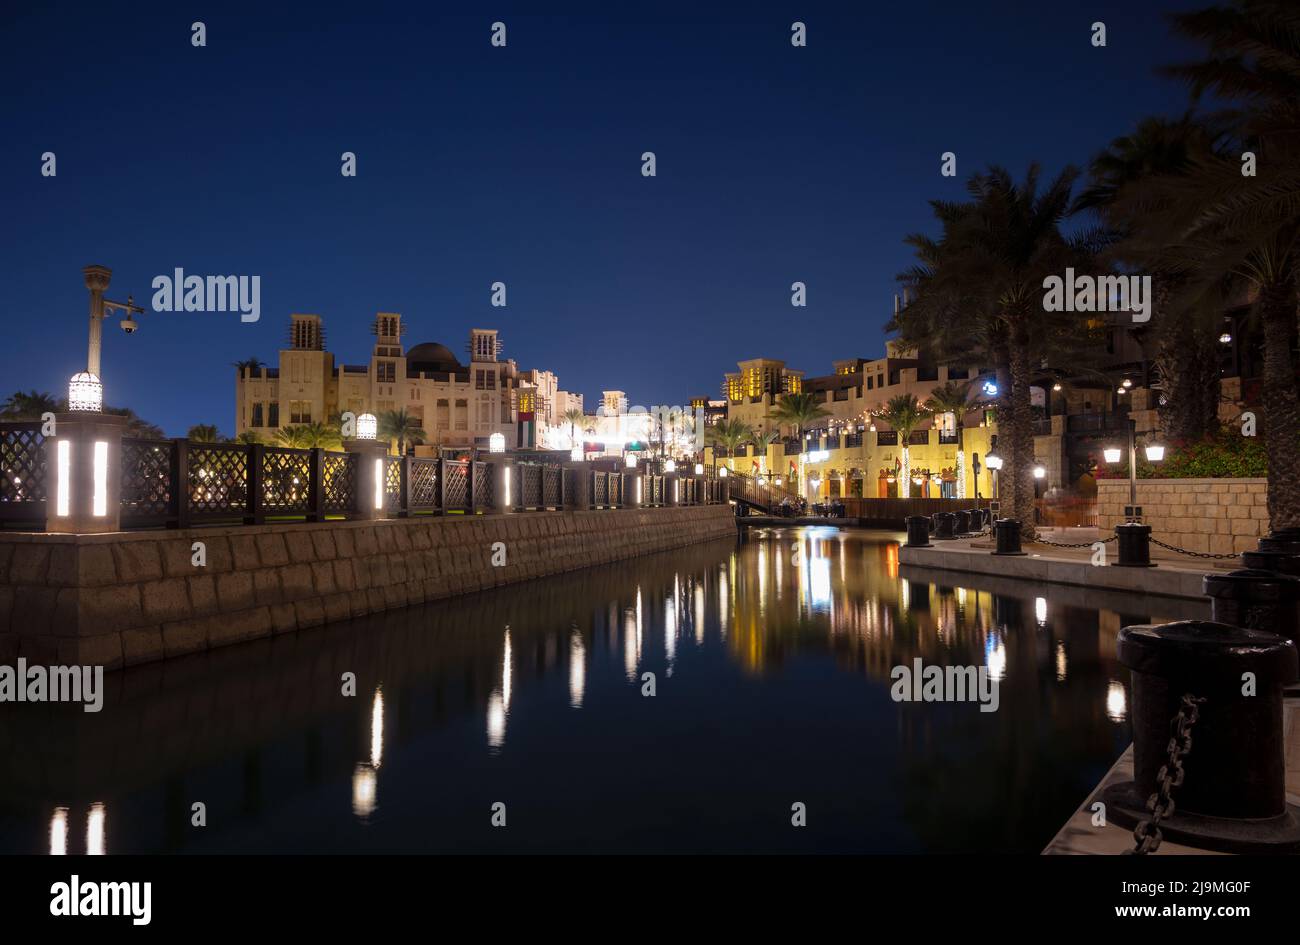 Night view of the illuminated artificial canal at the Souk Madinat Jumeirah which is a shopping mall designed in traditional Arabic style. Stock Photo